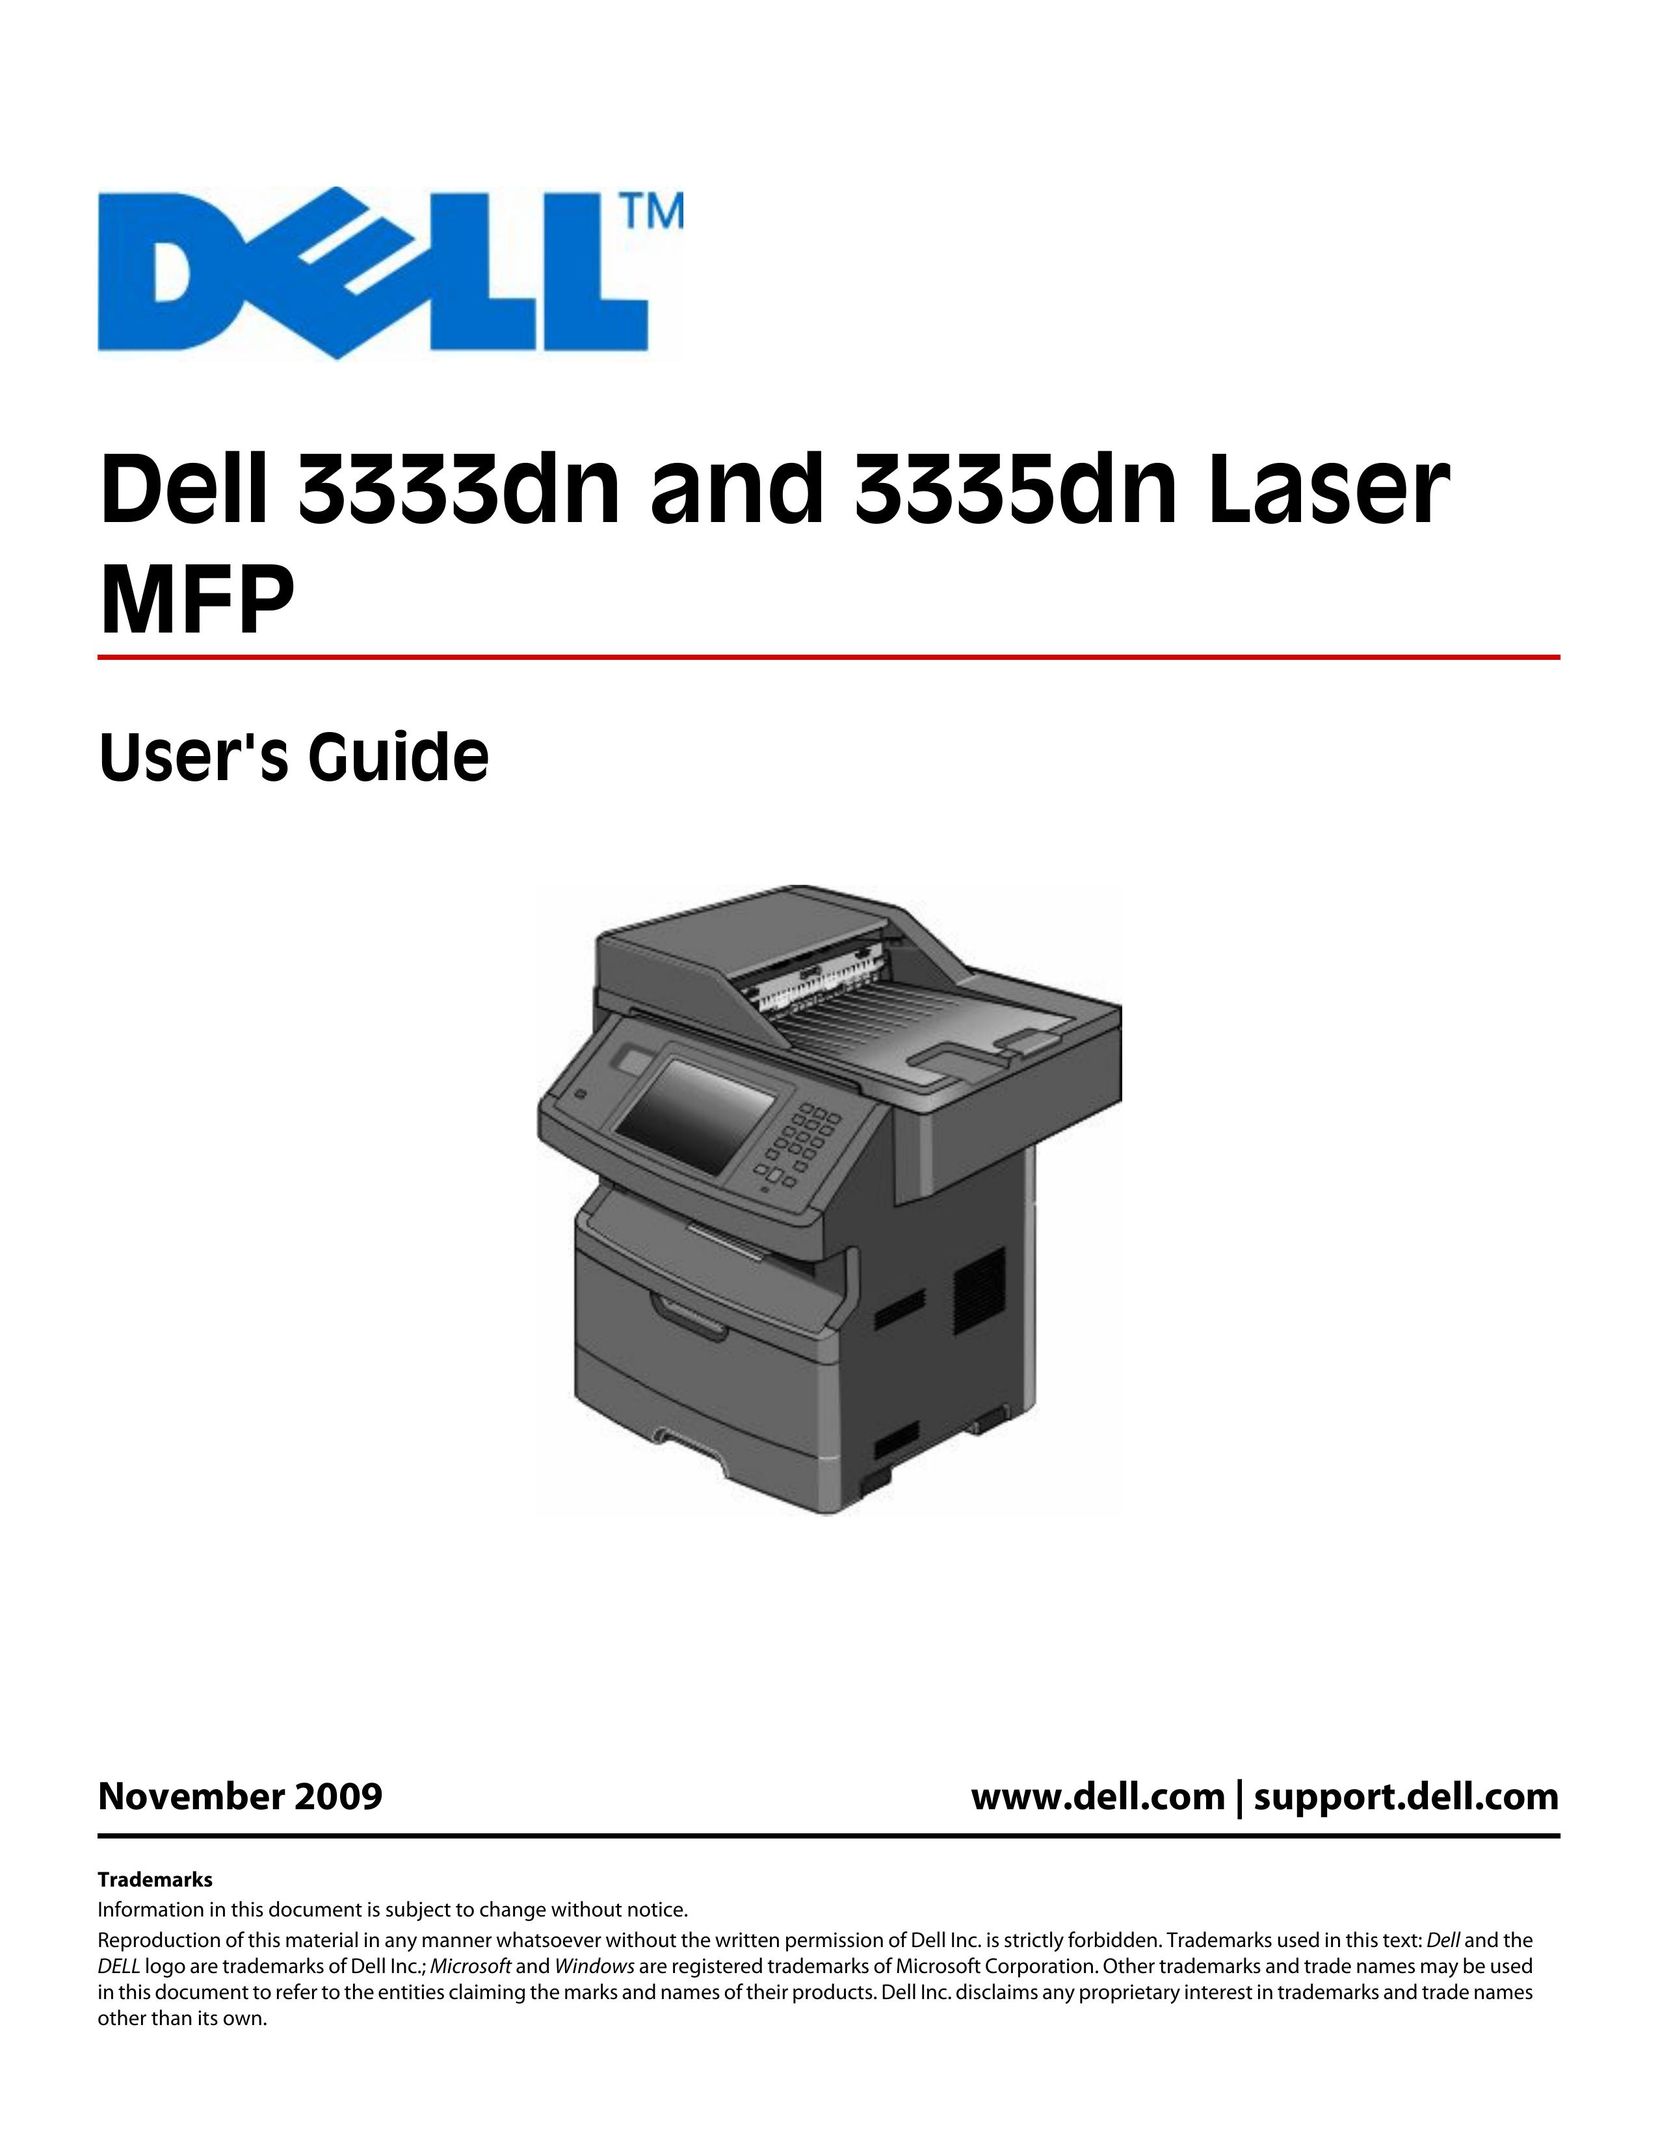 Dell 3335dn All in One Printer User Manual